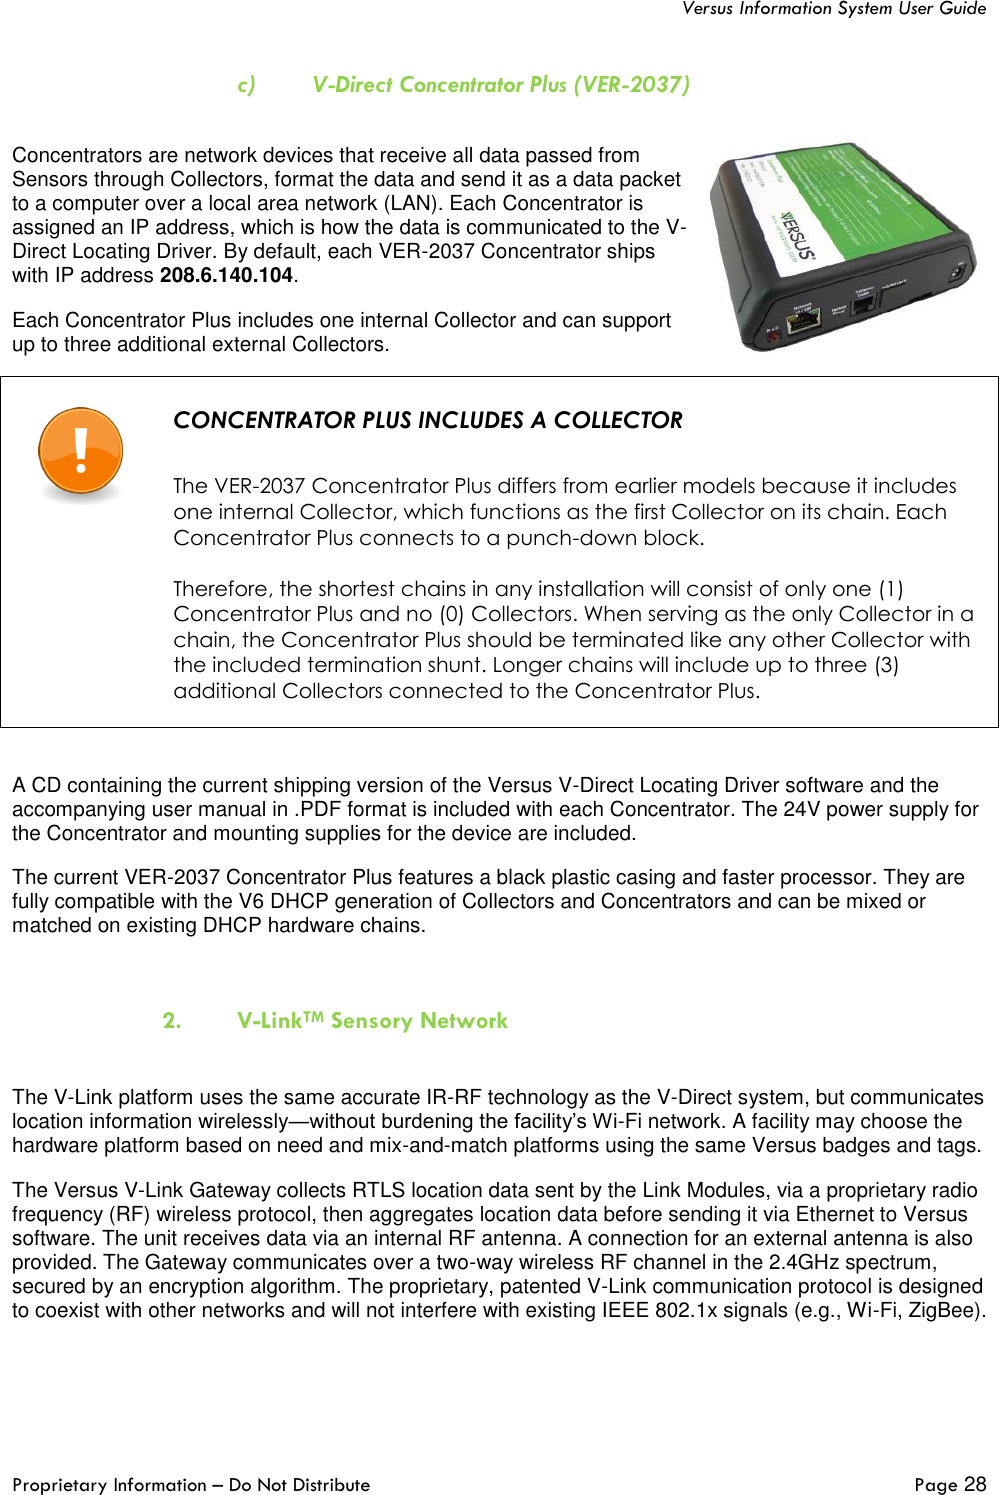   Versus Information System User Guide  Proprietary Information – Do Not Distribute   Page 28  c) V-Direct Concentrator Plus (VER-2037)  Concentrators are network devices that receive all data passed from Sensors through Collectors, format the data and send it as a data packet to a computer over a local area network (LAN). Each Concentrator is assigned an IP address, which is how the data is communicated to the V-Direct Locating Driver. By default, each VER-2037 Concentrator ships with IP address 208.6.140.104. Each Concentrator Plus includes one internal Collector and can support up to three additional external Collectors.    CONCENTRATOR PLUS INCLUDES A COLLECTOR   The VER-2037 Concentrator Plus differs from earlier models because it includes one internal Collector, which functions as the first Collector on its chain. Each Concentrator Plus connects to a punch-down block.  Therefore, the shortest chains in any installation will consist of only one (1) Concentrator Plus and no (0) Collectors. When serving as the only Collector in a chain, the Concentrator Plus should be terminated like any other Collector with the included termination shunt. Longer chains will include up to three (3) additional Collectors connected to the Concentrator Plus.   A CD containing the current shipping version of the Versus V-Direct Locating Driver software and the accompanying user manual in .PDF format is included with each Concentrator. The 24V power supply for the Concentrator and mounting supplies for the device are included. The current VER-2037 Concentrator Plus features a black plastic casing and faster processor. They are fully compatible with the V6 DHCP generation of Collectors and Concentrators and can be mixed or matched on existing DHCP hardware chains.   2. V-LinkTM Sensory Network  The V-Link platform uses the same accurate IR-RF technology as the V-Direct system, but communicates location information wirelessly—without burdening the facility’s Wi-Fi network. A facility may choose the hardware platform based on need and mix-and-match platforms using the same Versus badges and tags.  The Versus V-Link Gateway collects RTLS location data sent by the Link Modules, via a proprietary radio frequency (RF) wireless protocol, then aggregates location data before sending it via Ethernet to Versus software. The unit receives data via an internal RF antenna. A connection for an external antenna is also provided. The Gateway communicates over a two-way wireless RF channel in the 2.4GHz spectrum, secured by an encryption algorithm. The proprietary, patented V-Link communication protocol is designed to coexist with other networks and will not interfere with existing IEEE 802.1x signals (e.g., Wi-Fi, ZigBee).  